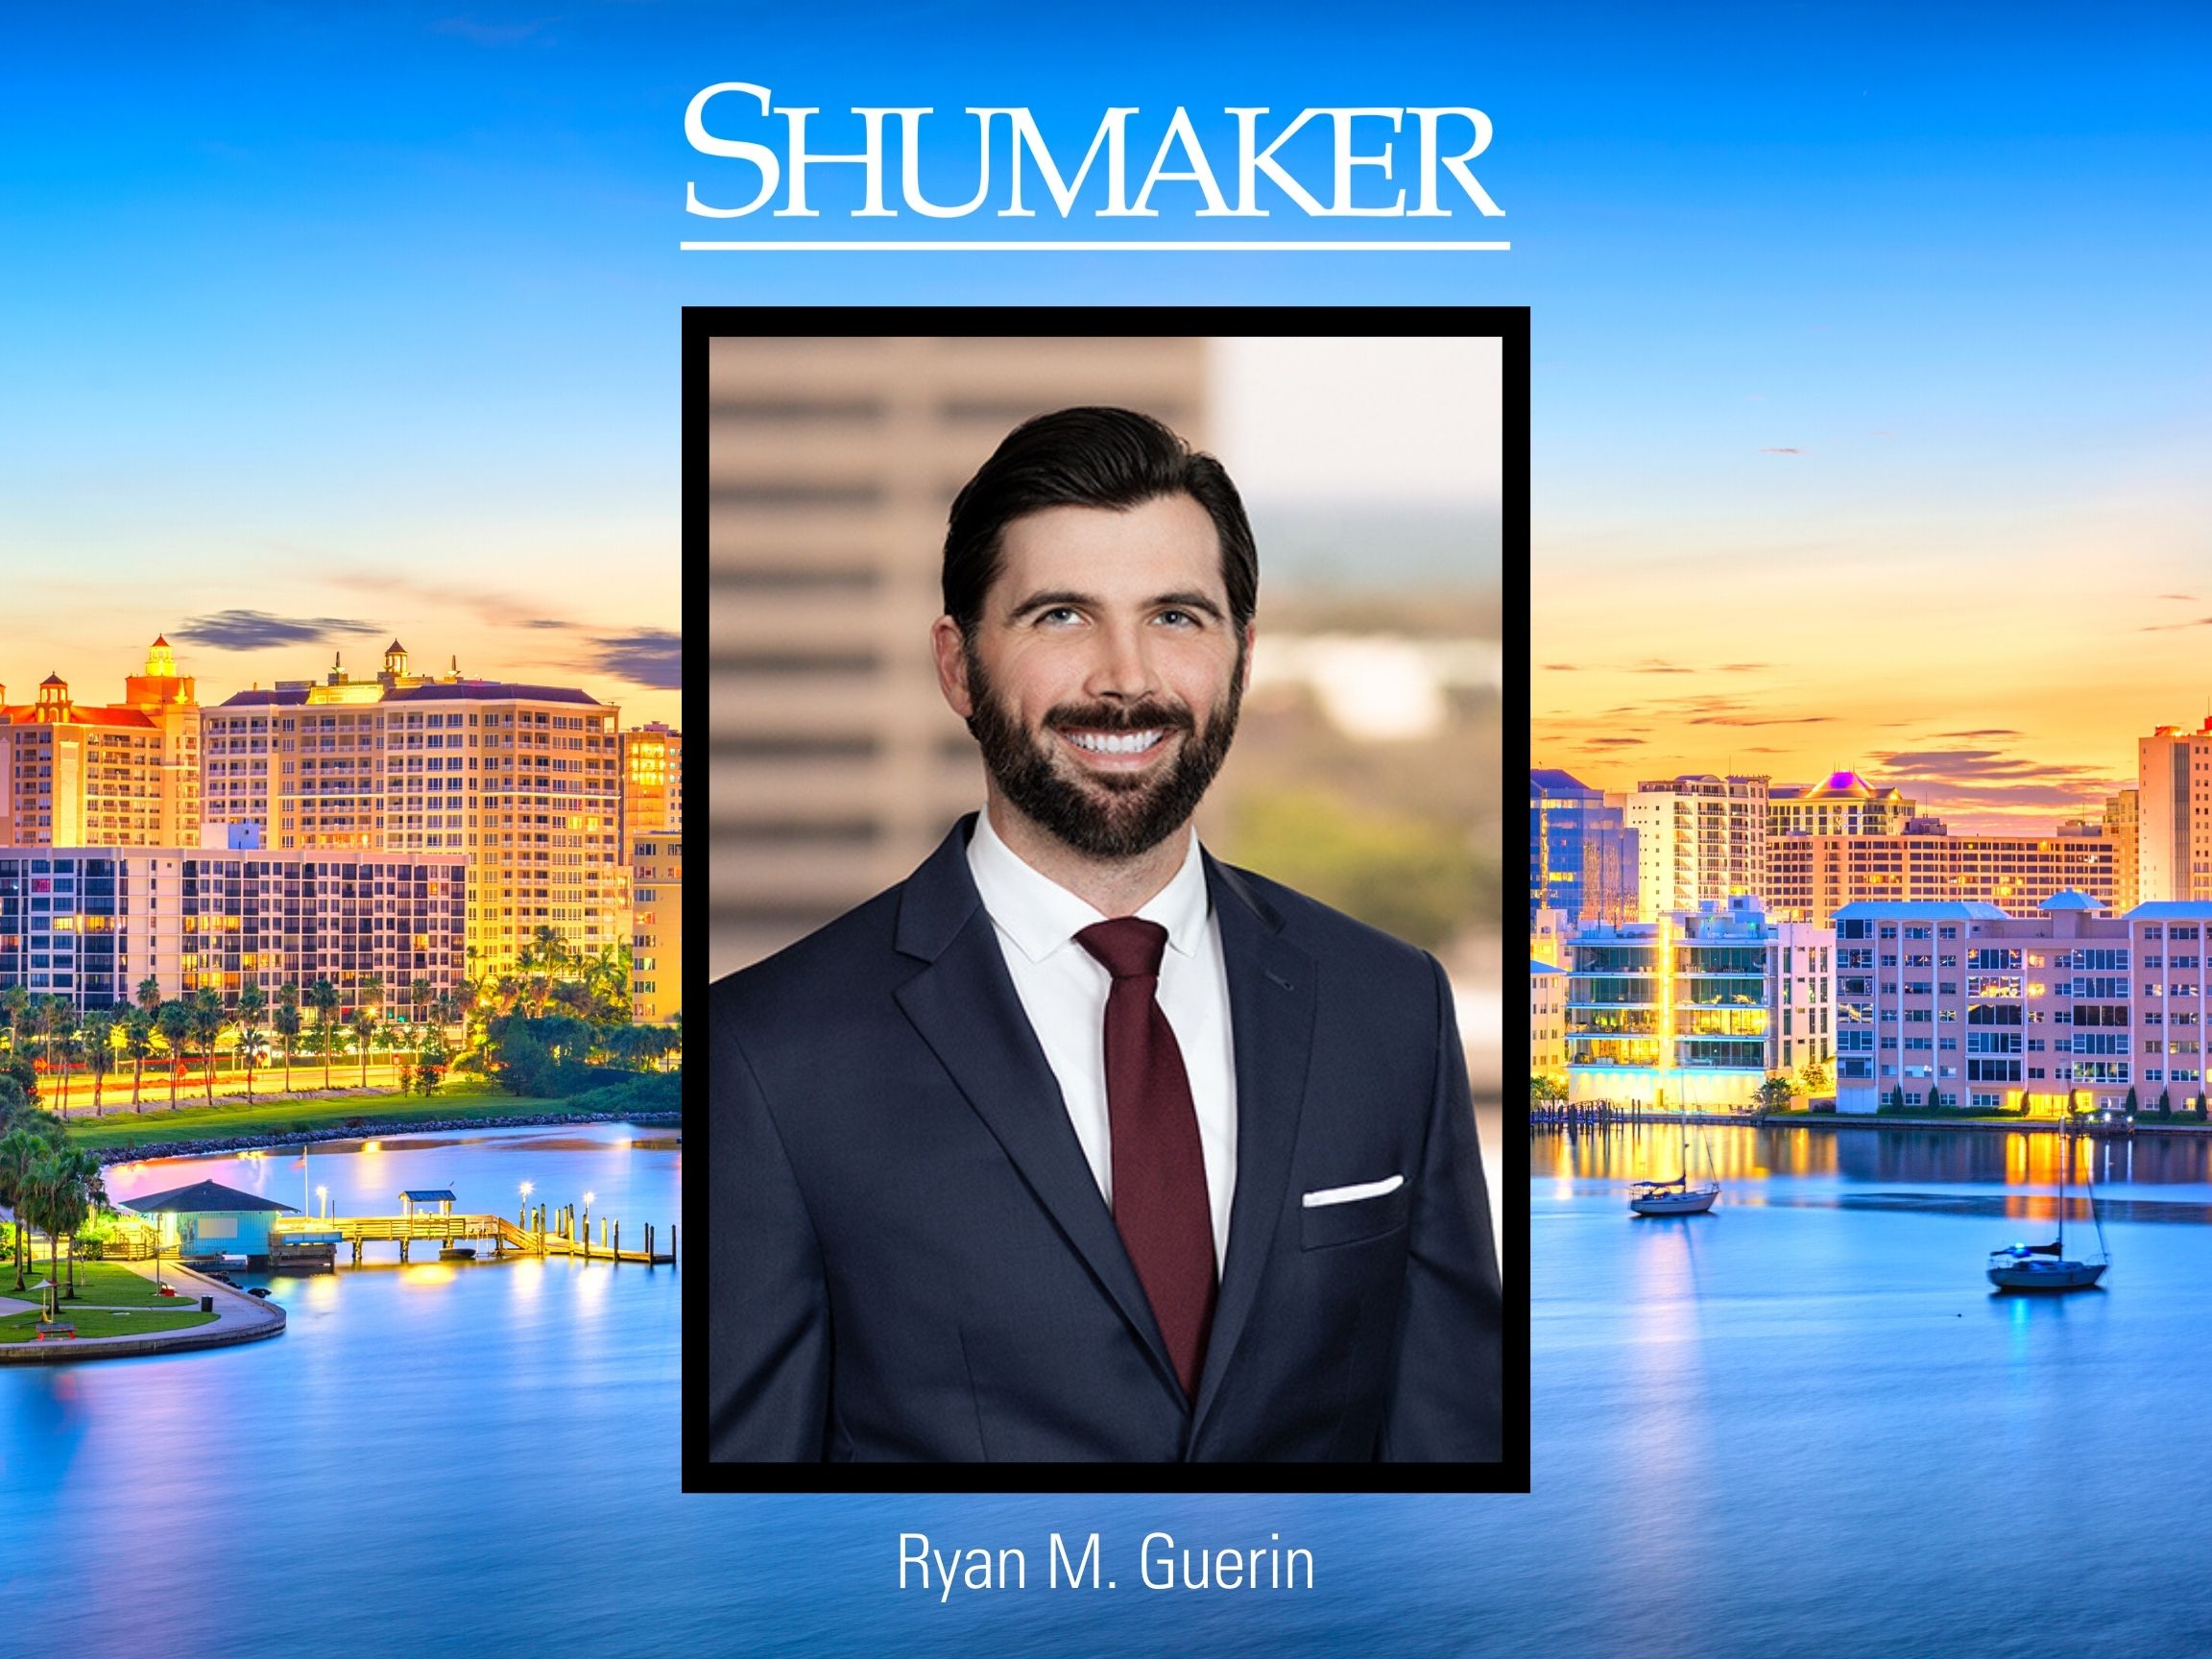 Shumaker Welcomes Third Additional Attorney in Less than a Month to its National Labor, Employment and Benefits Service Line